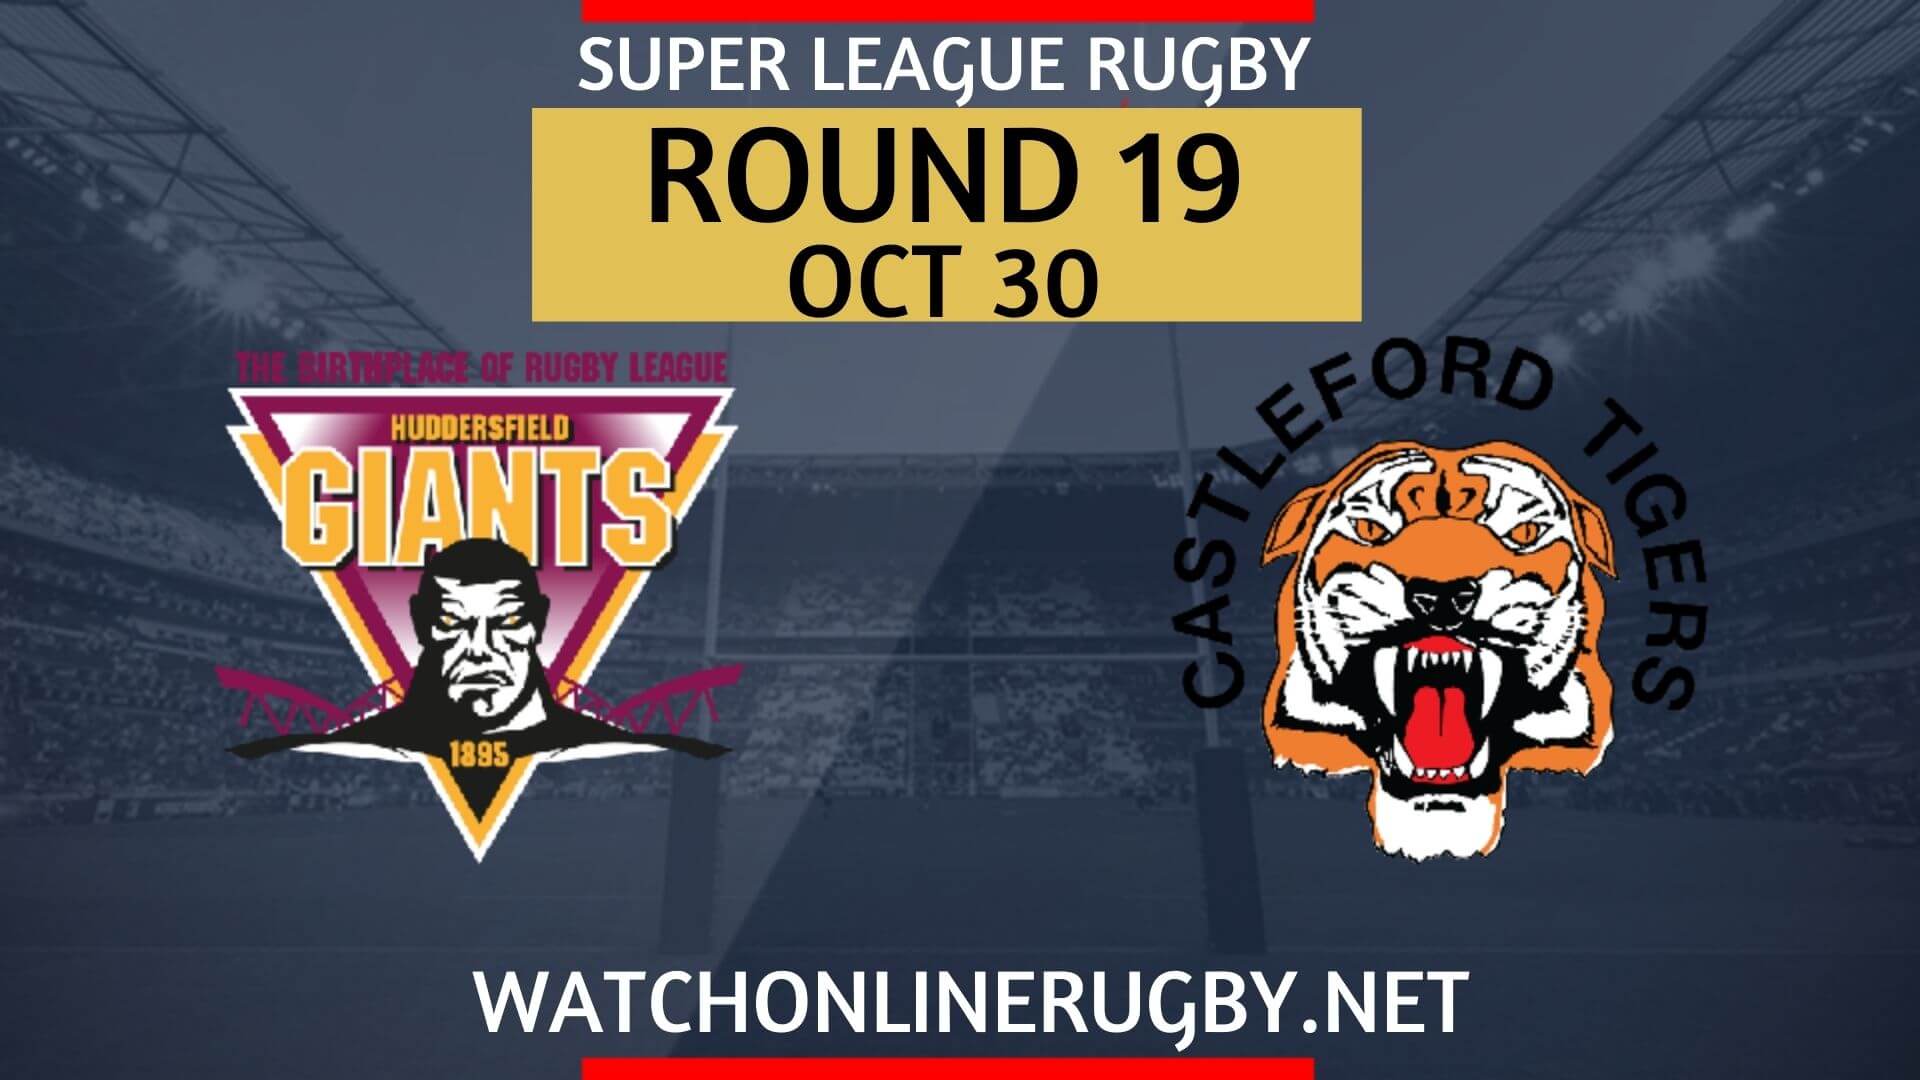 Huddersfield Giants Vs Castleford Tigers Super League Rugby 2020 RD 19